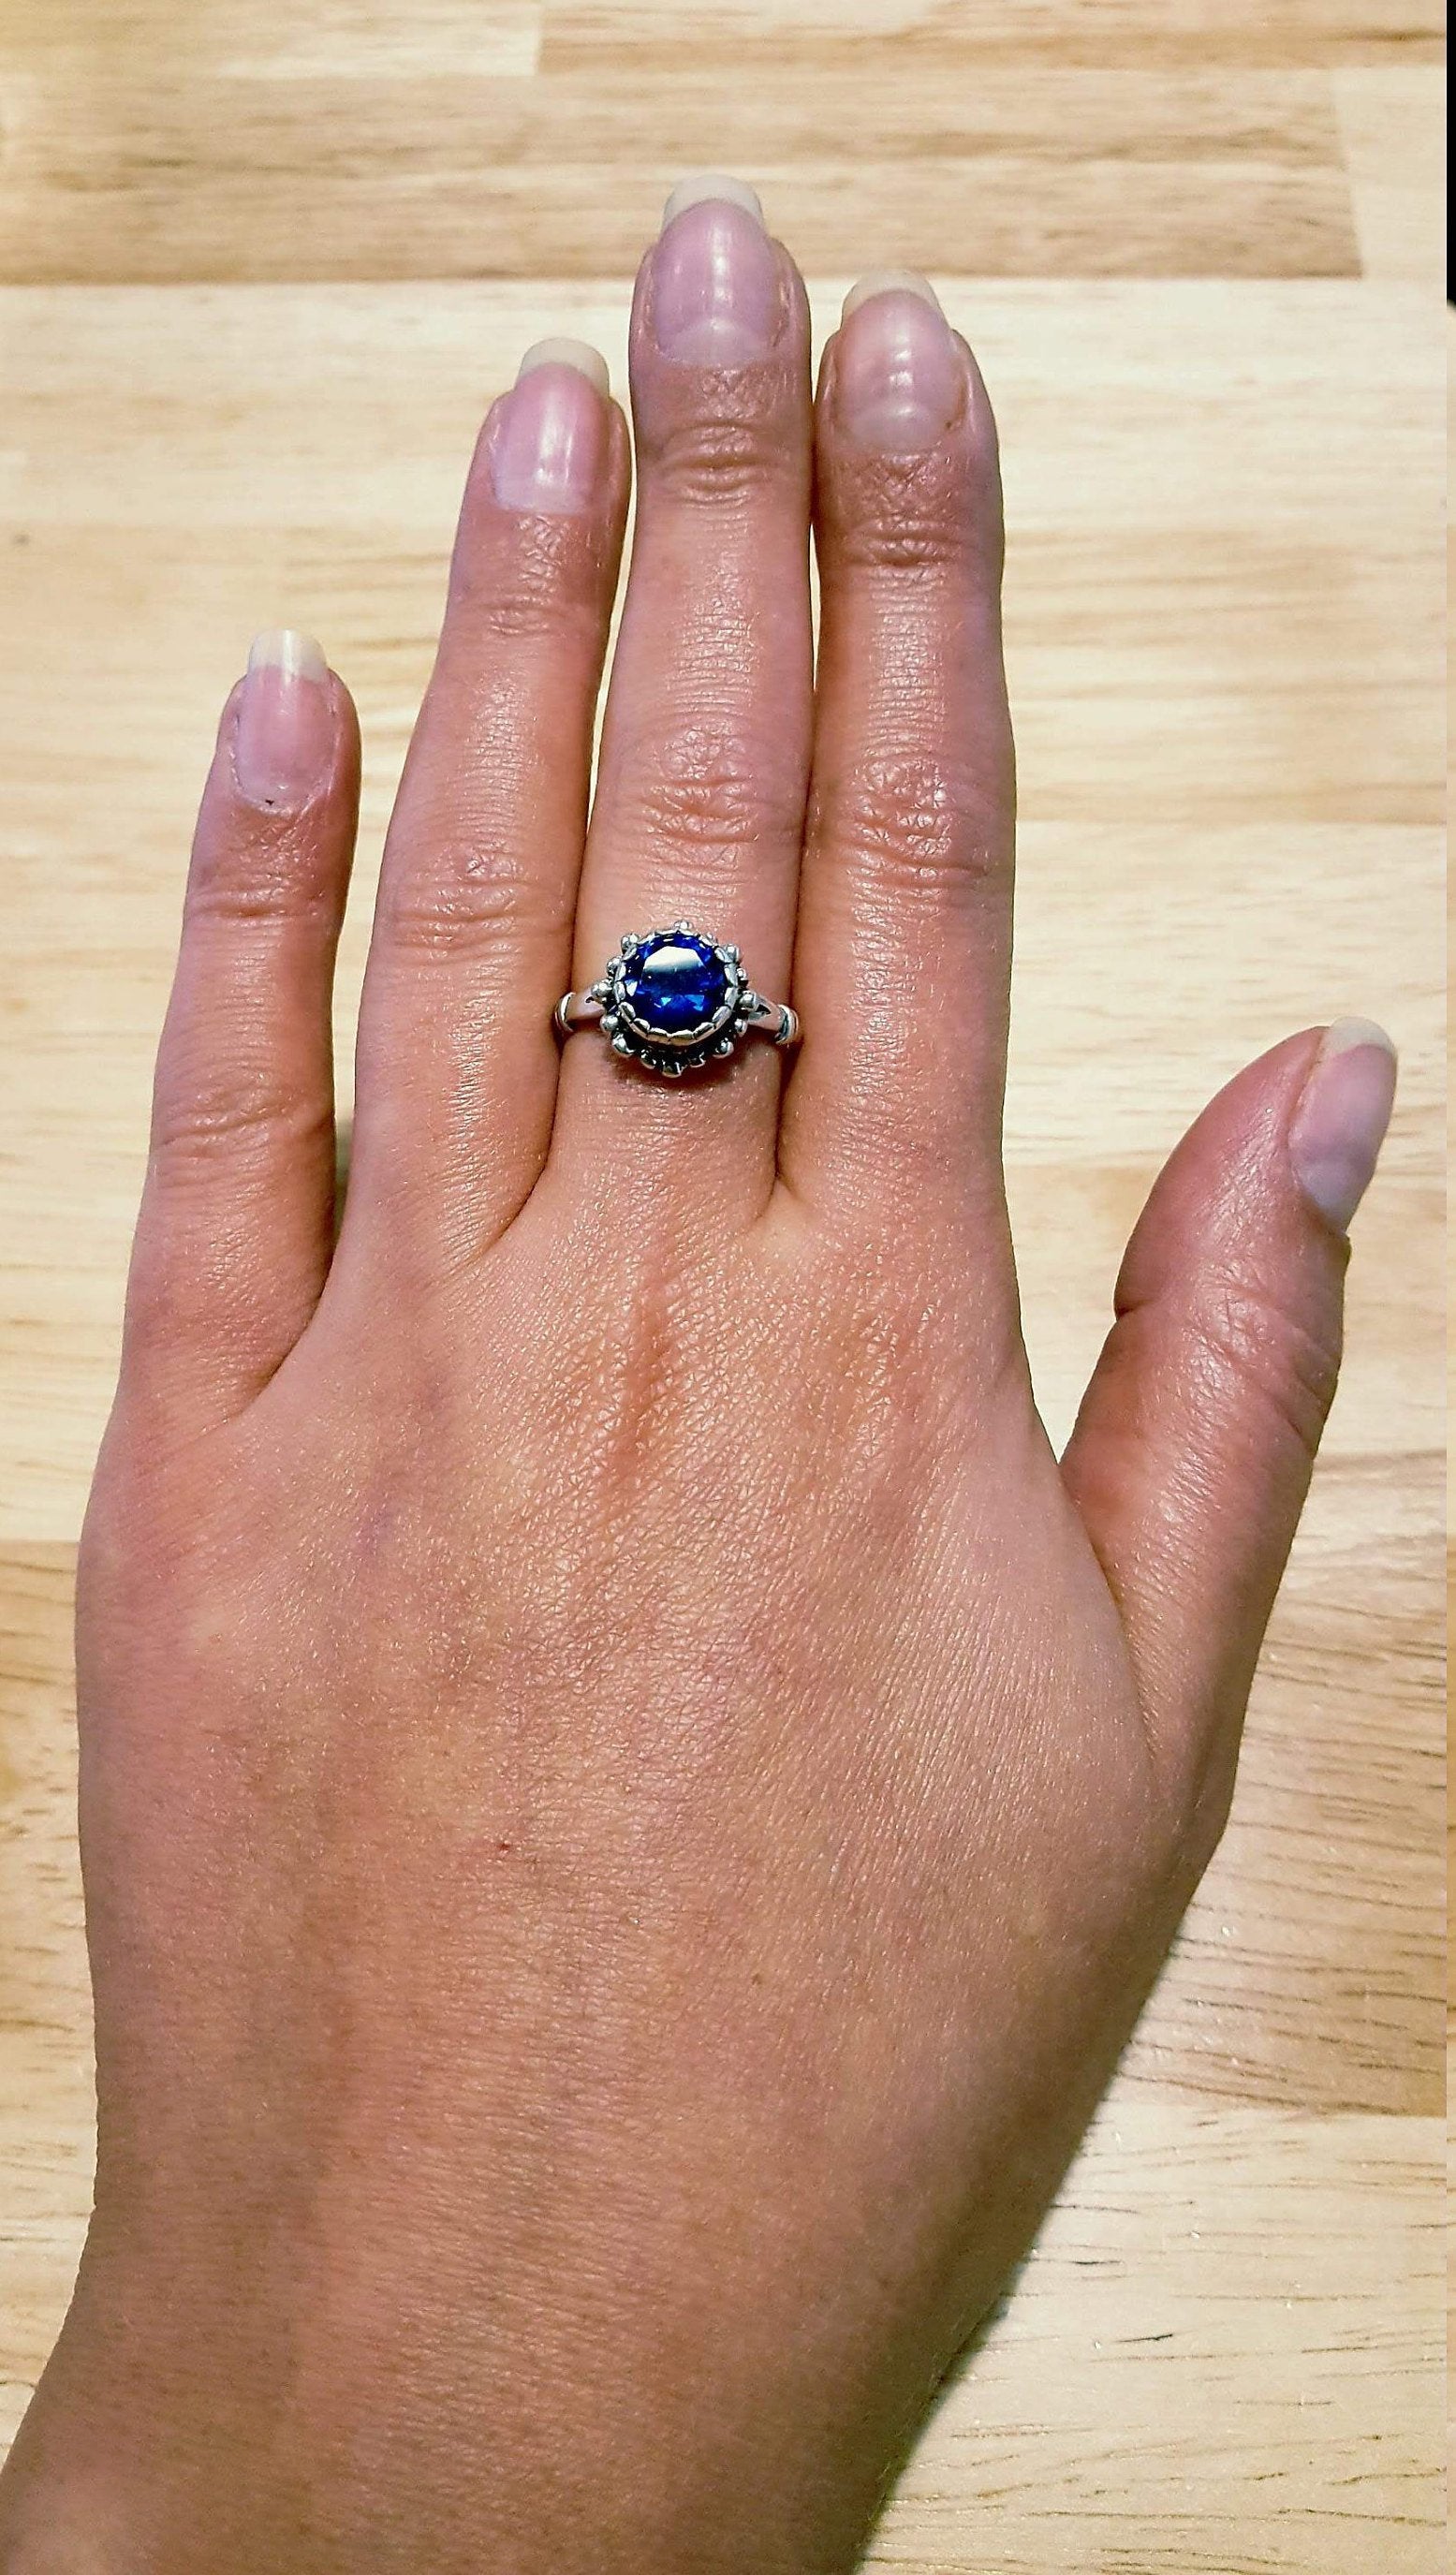 Sapphire Ring, Blue Sapphire Ring, Created Sapphire, Vintage Sapphire Ring, 3 Carats, Vintage Rings, Pure Silver, Solid Silver, Blue Ring